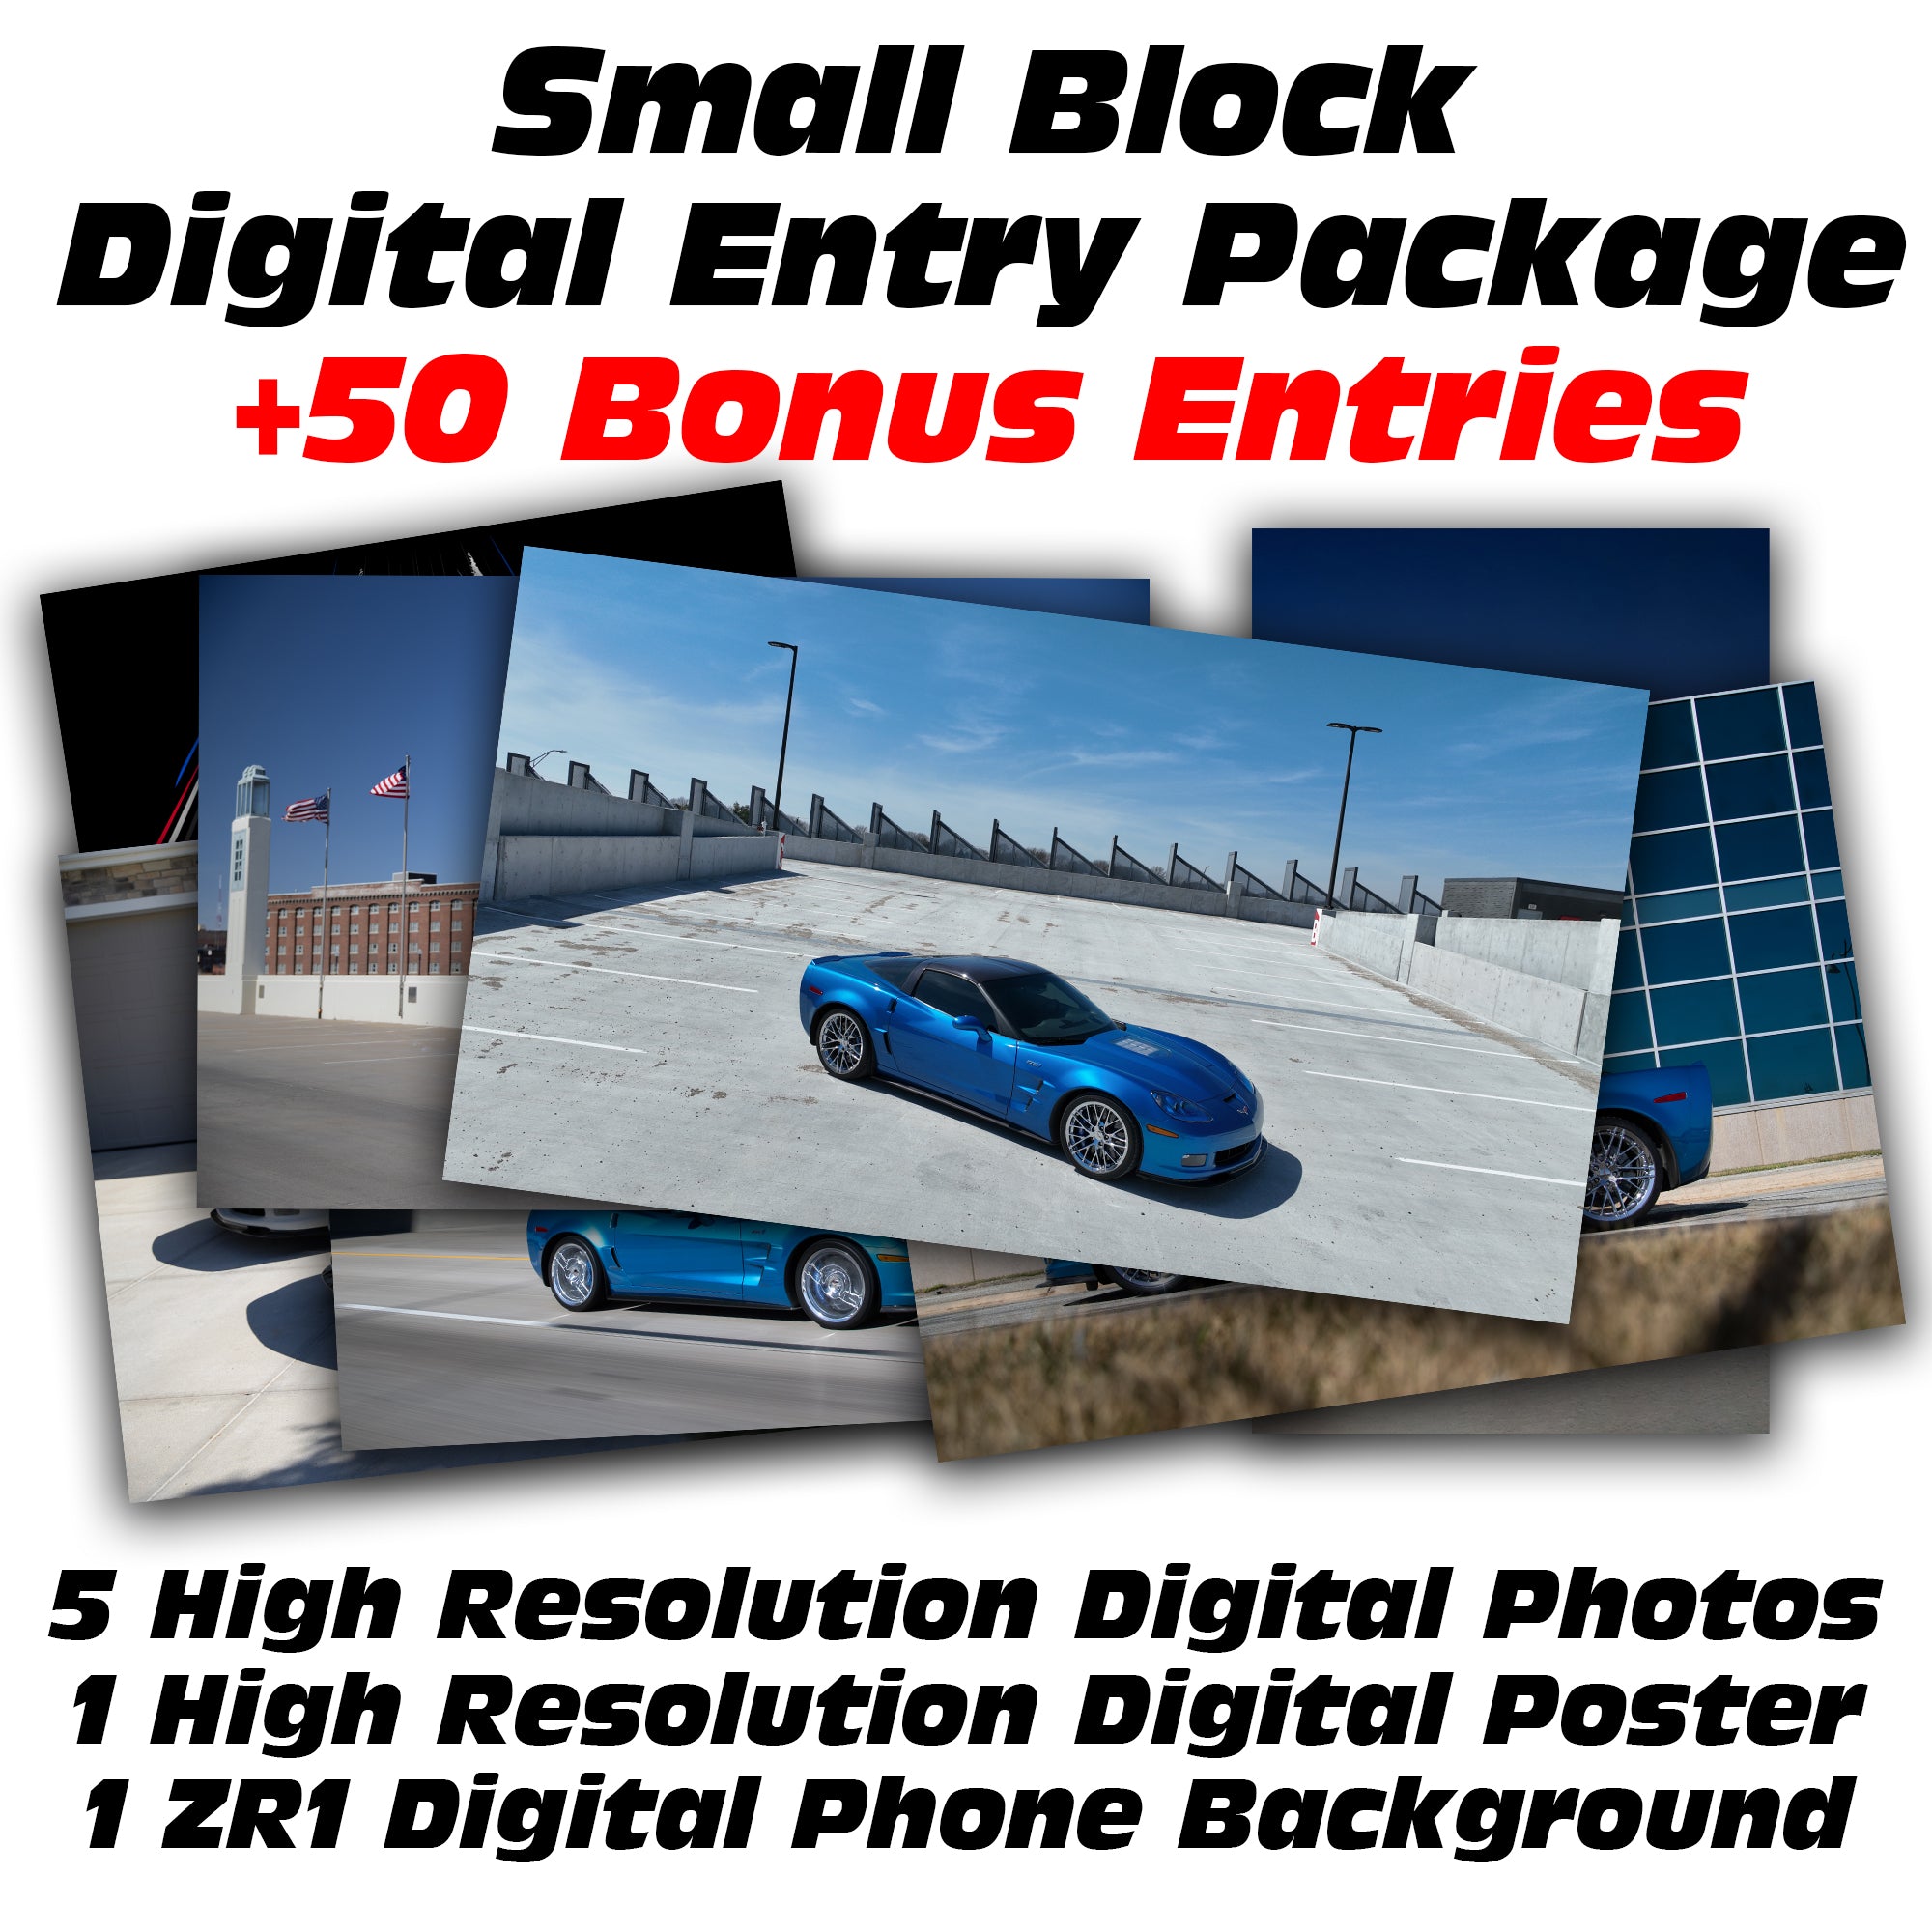 Small Block Digital Entry Package